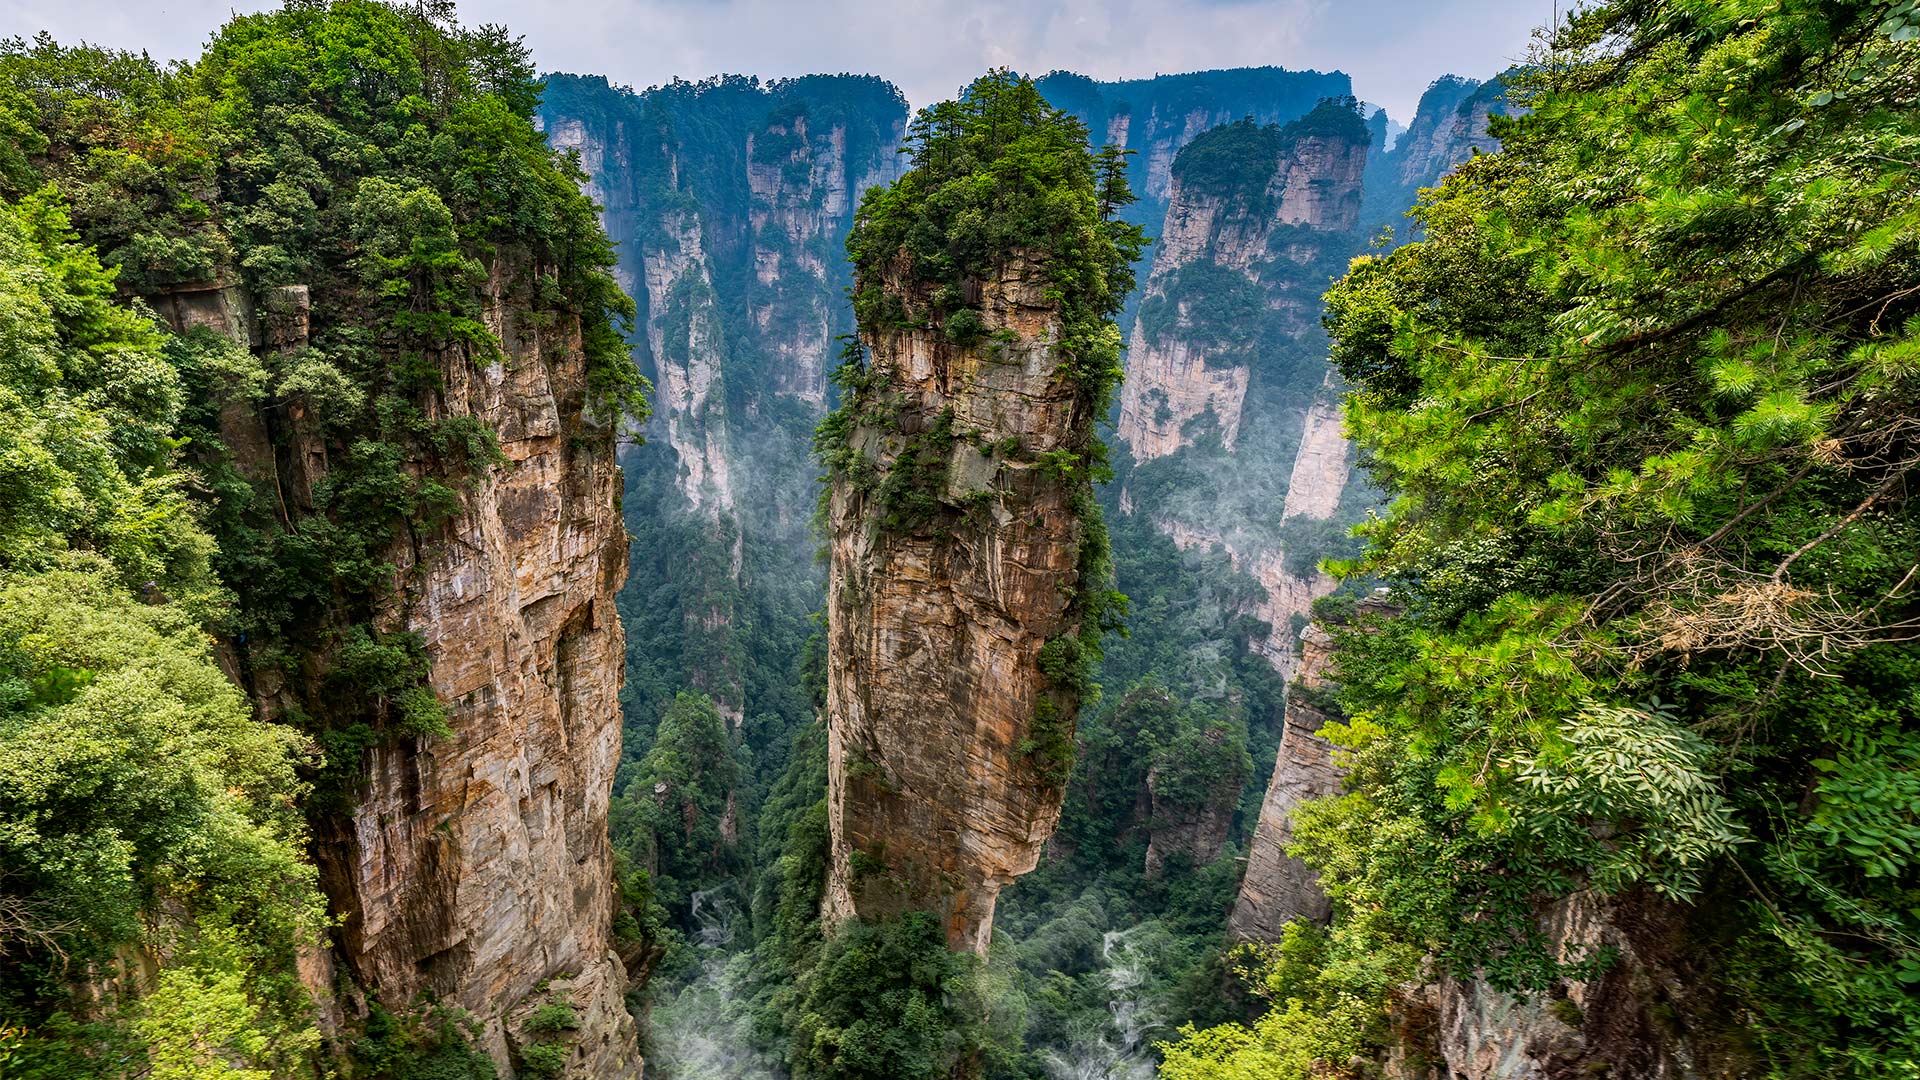 An image of Forest and mountains in China